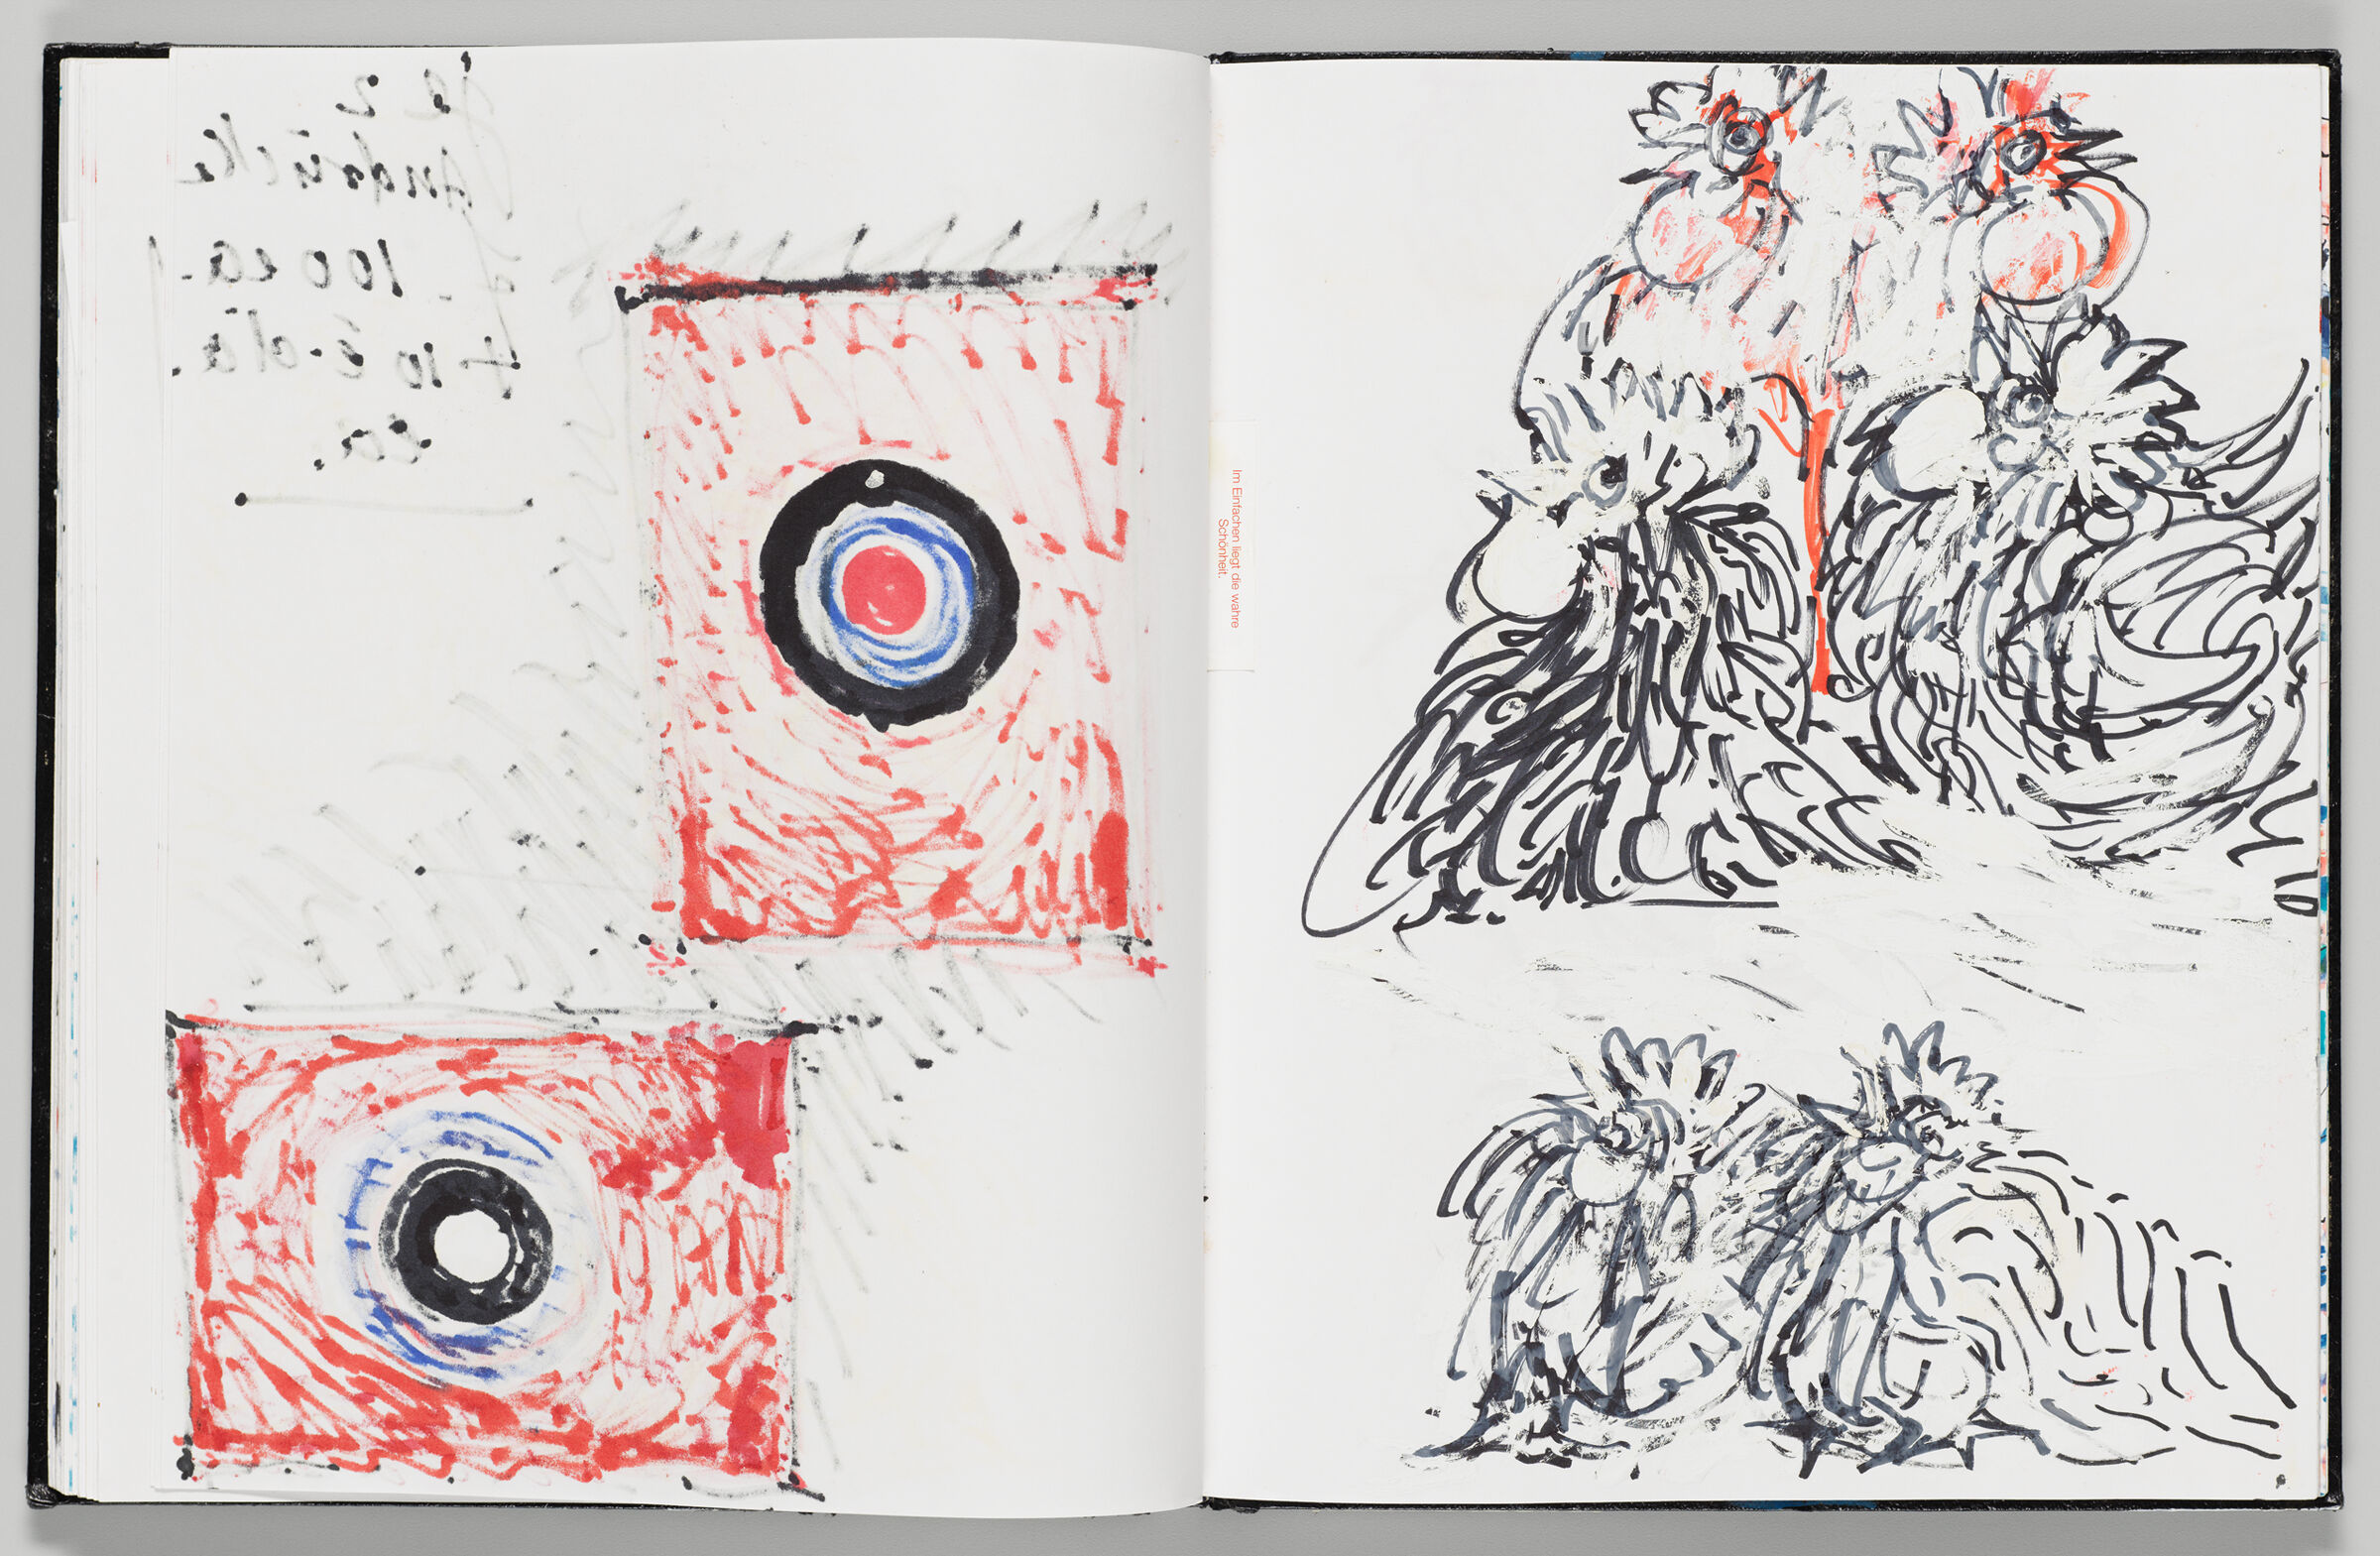 Untitled (Bleed-Through From Previous Page, Left Page); Untitled (Roosters, Right Page)